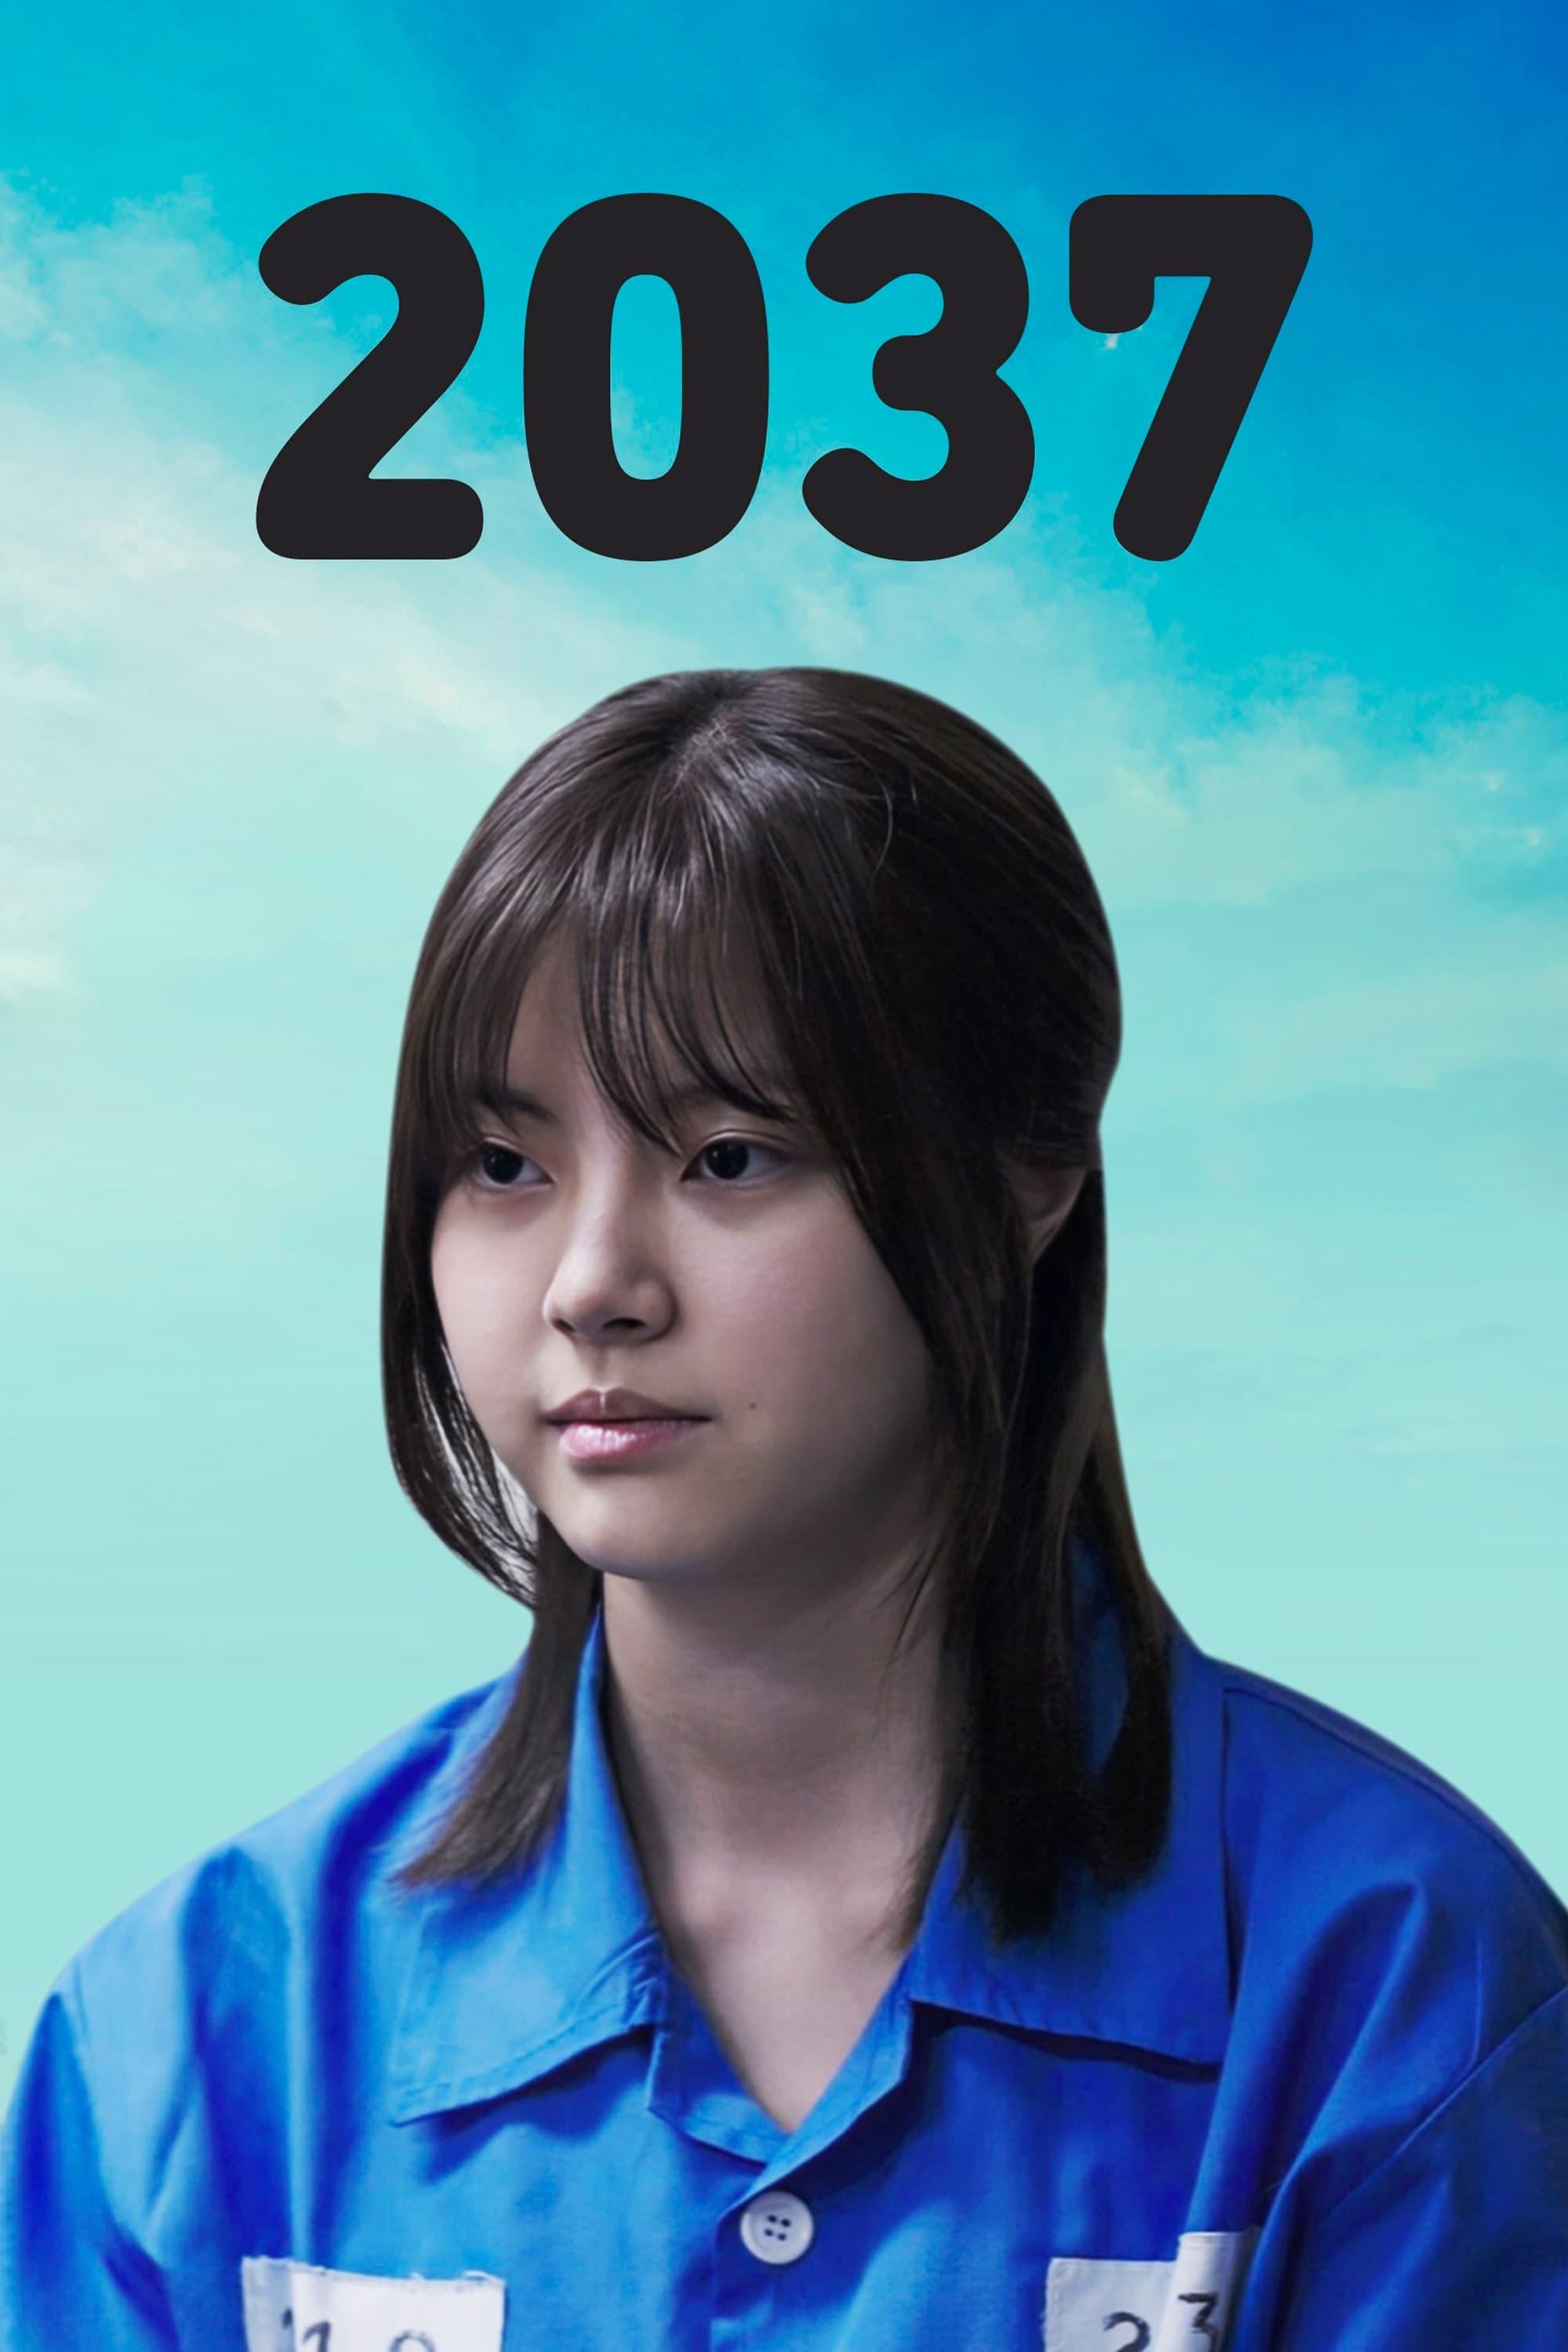 2037 poster